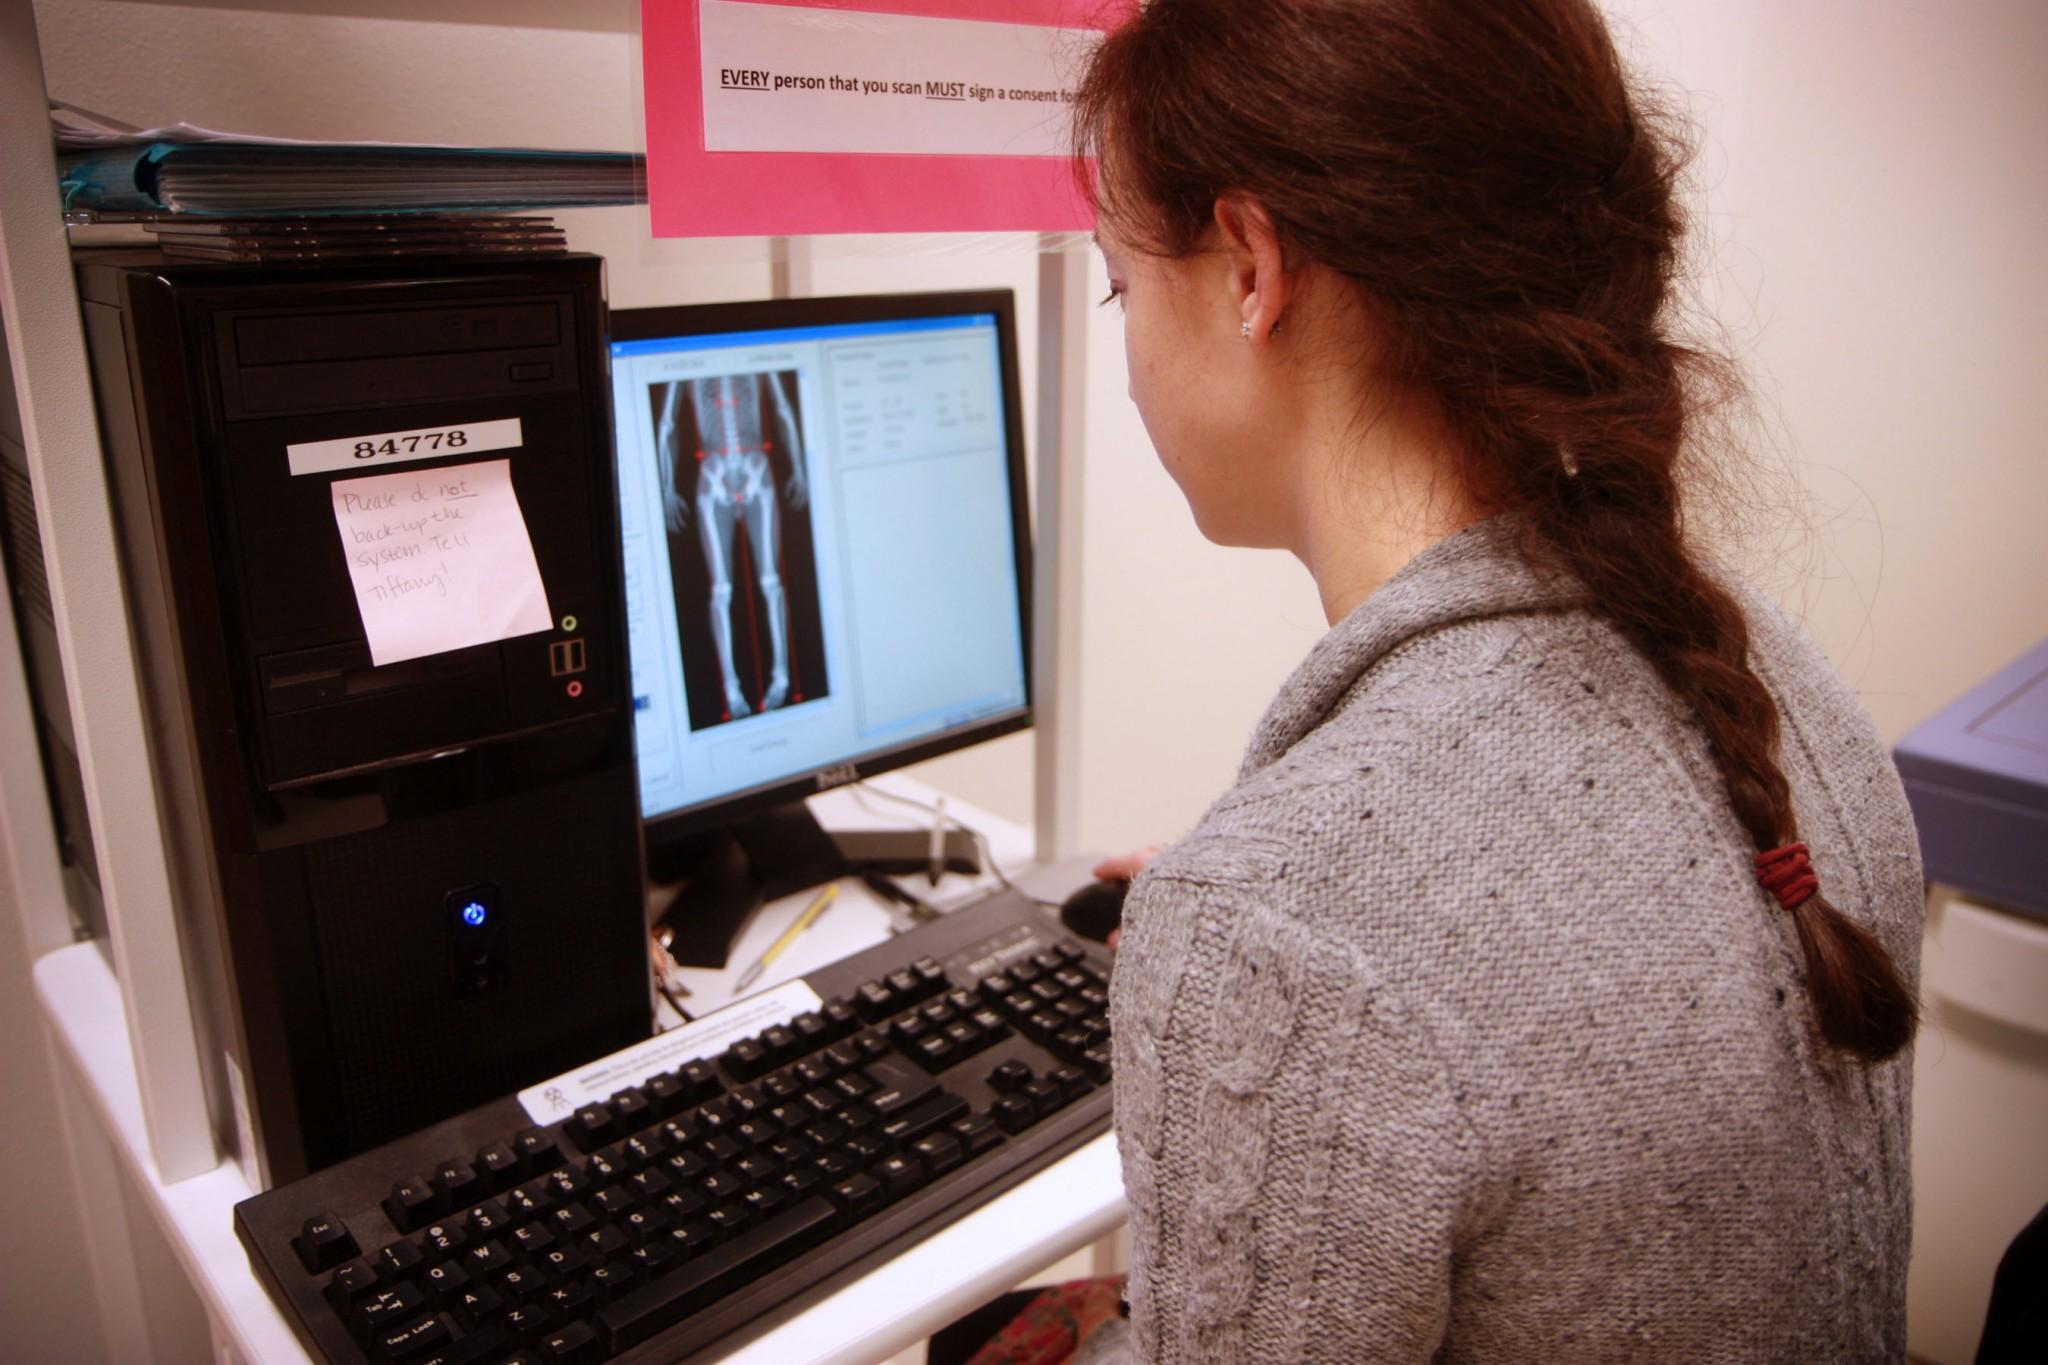 Biomedical Anthropology Graduate student, Amyee Fenwick, conducts a DEXA scan on local climbers to measure bone density as part of her masters thesis research. The DEXA scan is one of many impressive technologies avaliable to students and faculty located in the Human Performance Clinical Research Laboratory on campus.